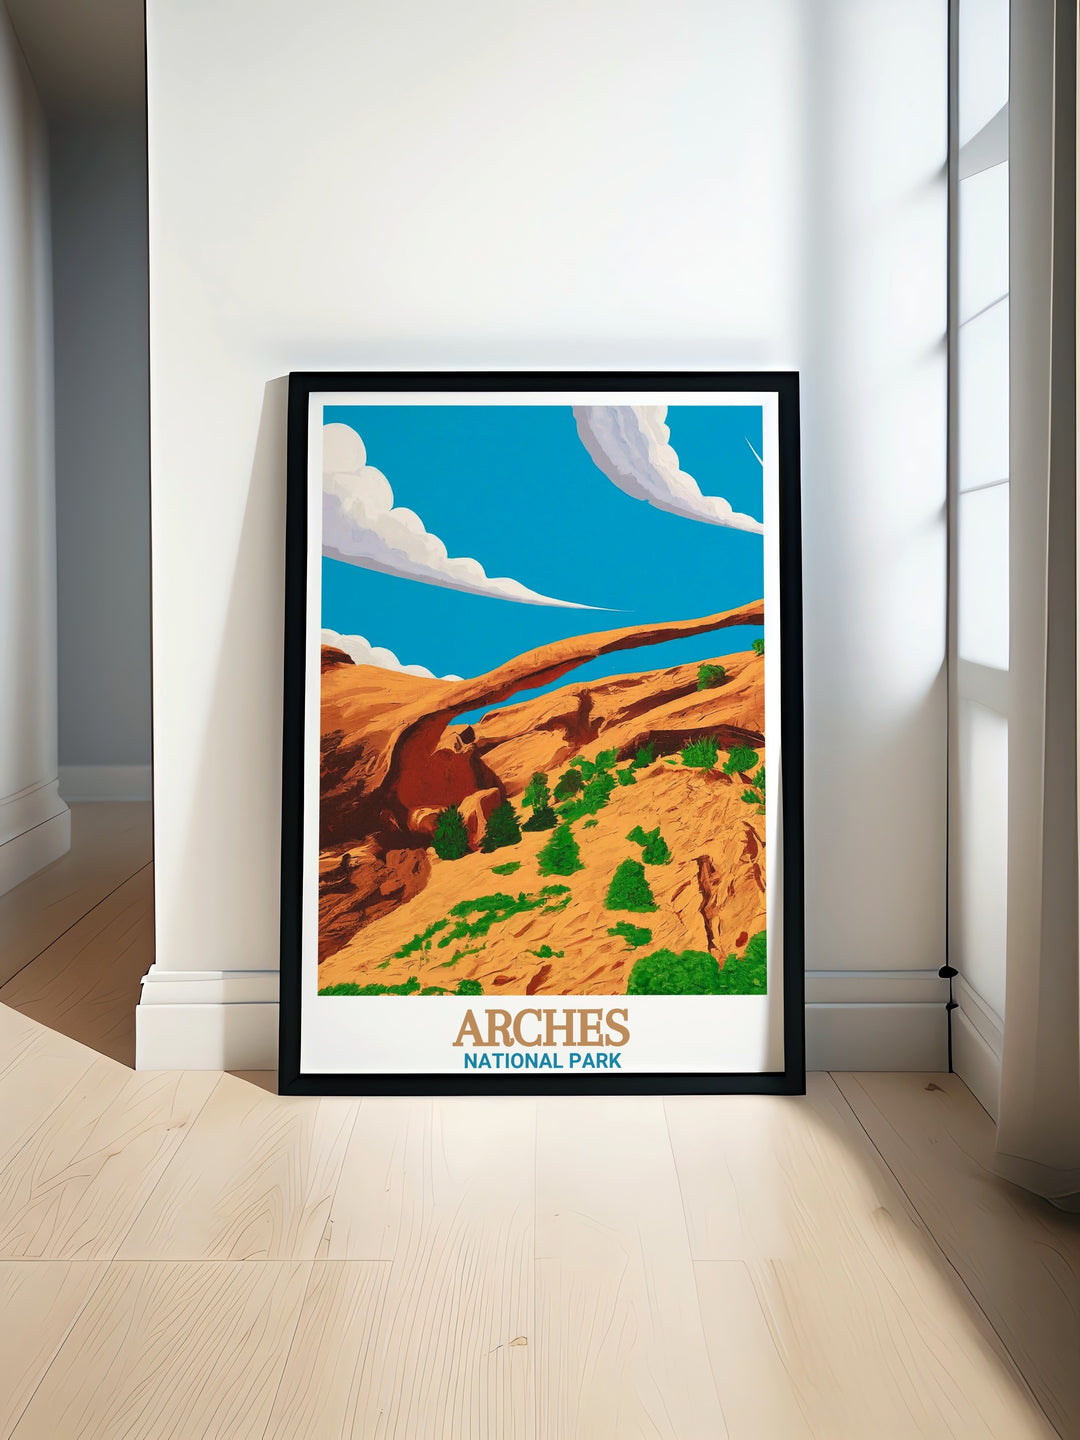 Landscape Arch travel poster showcasing the stunning natural formation in Arches National Park with vibrant colors and intricate details perfect for enhancing home decor or as a thoughtful gift for nature enthusiasts and National Park lovers.